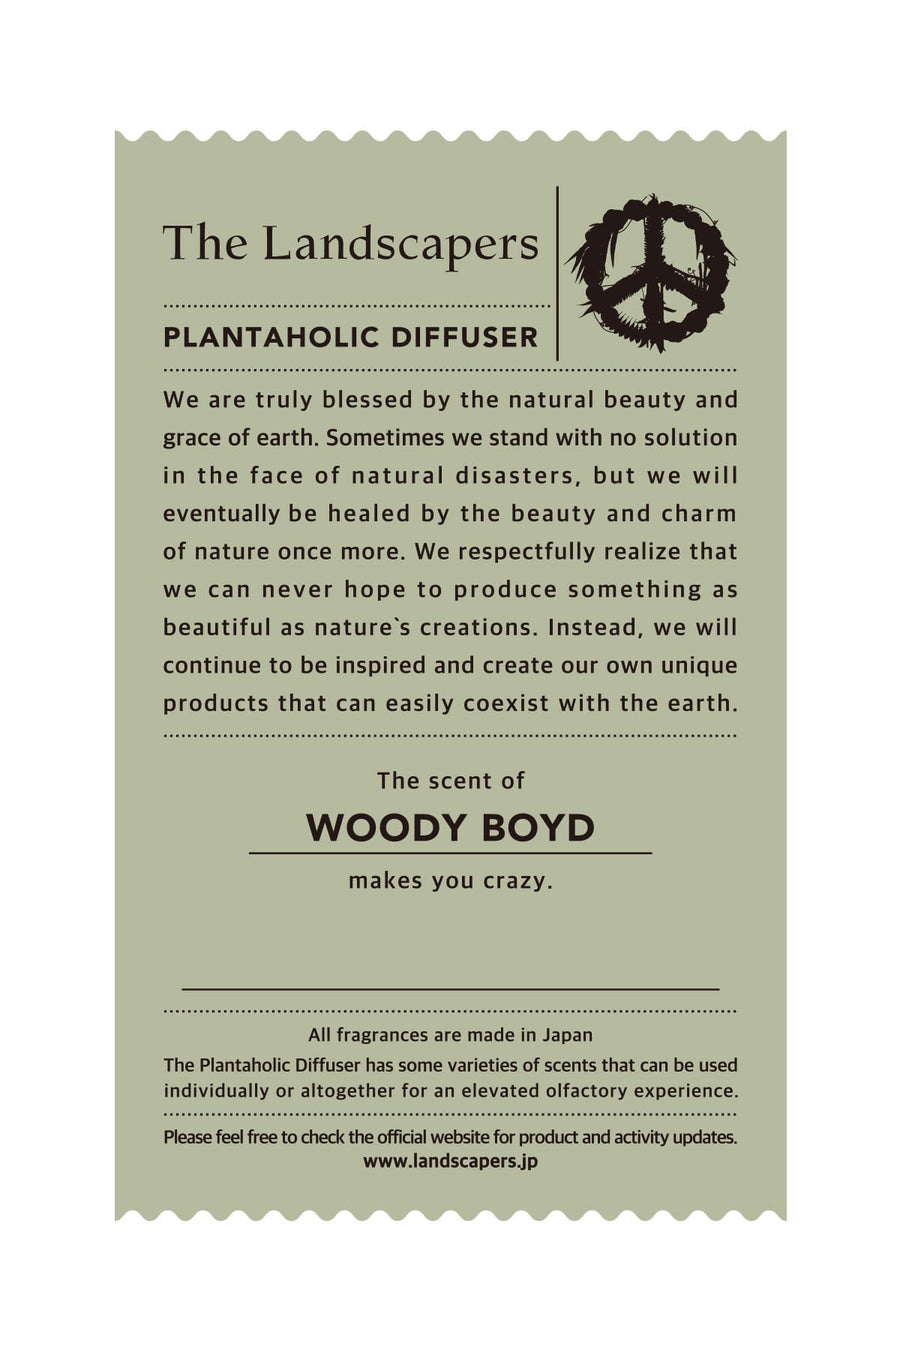 THE LANDSCAPERS -PLANTAHOLIC DIFFUSER TYPE D 02b- Woody Boyd